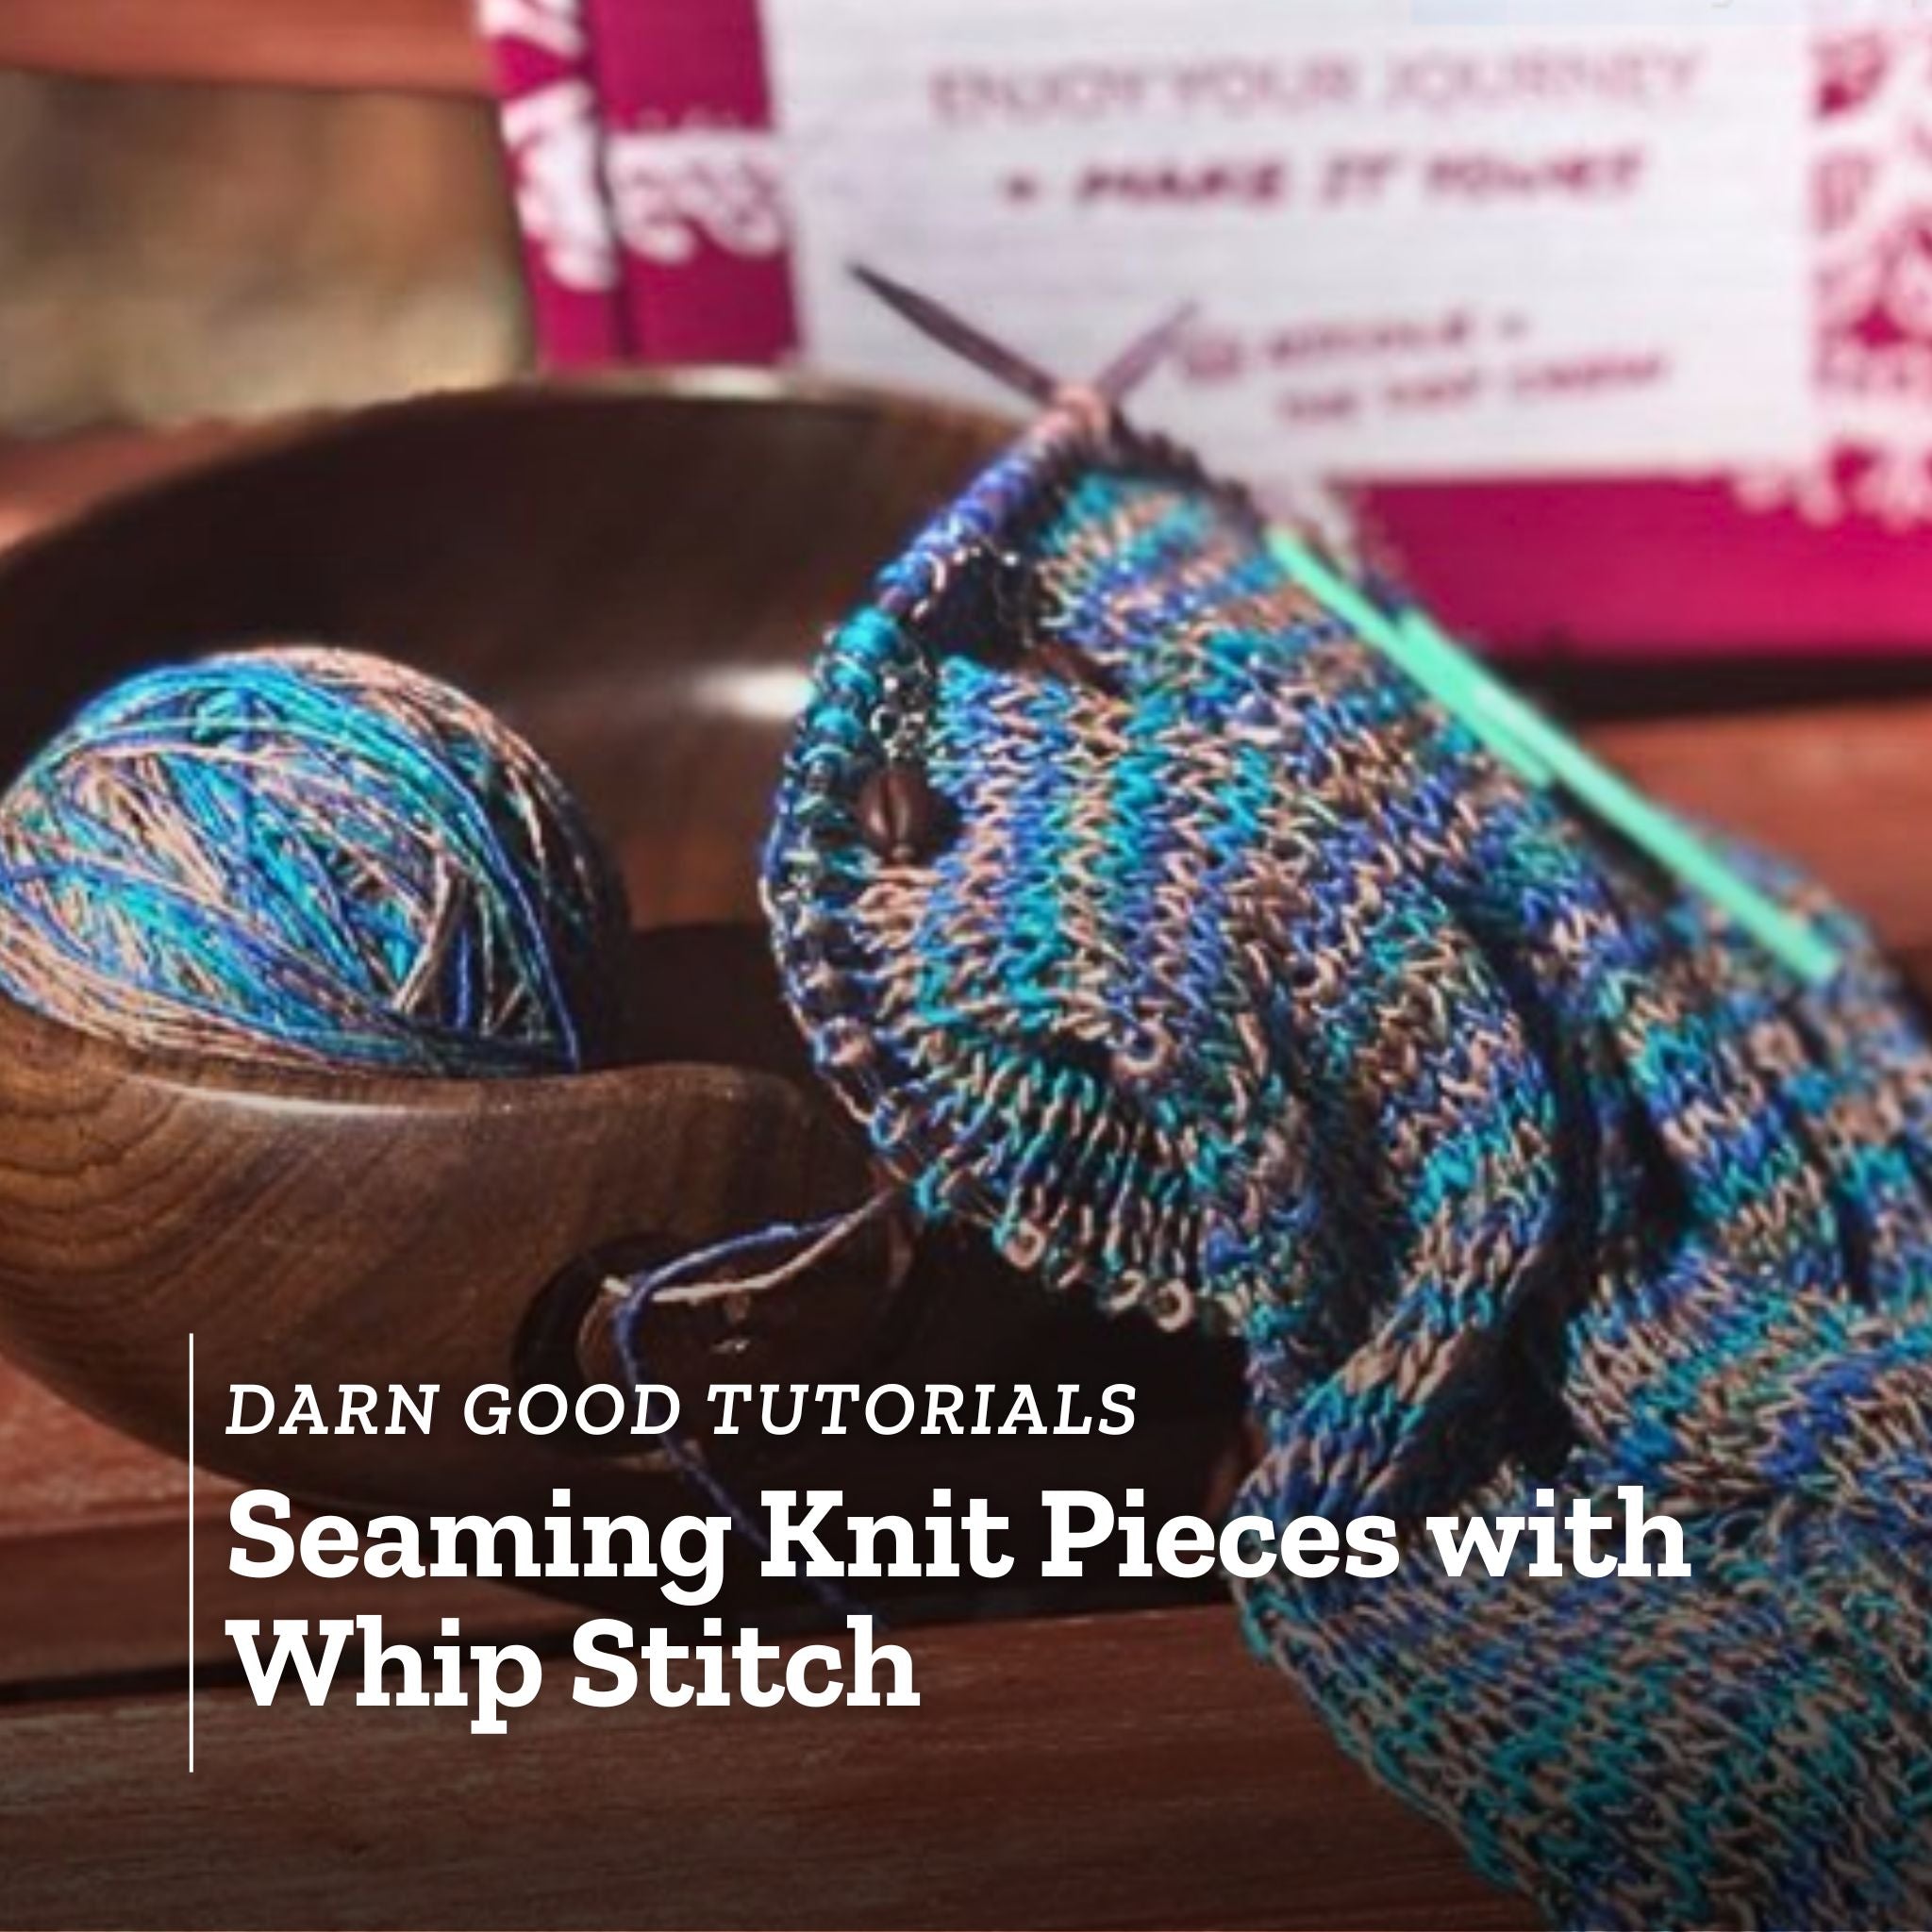 How to Seam Knit Pieces with Whip Stitch